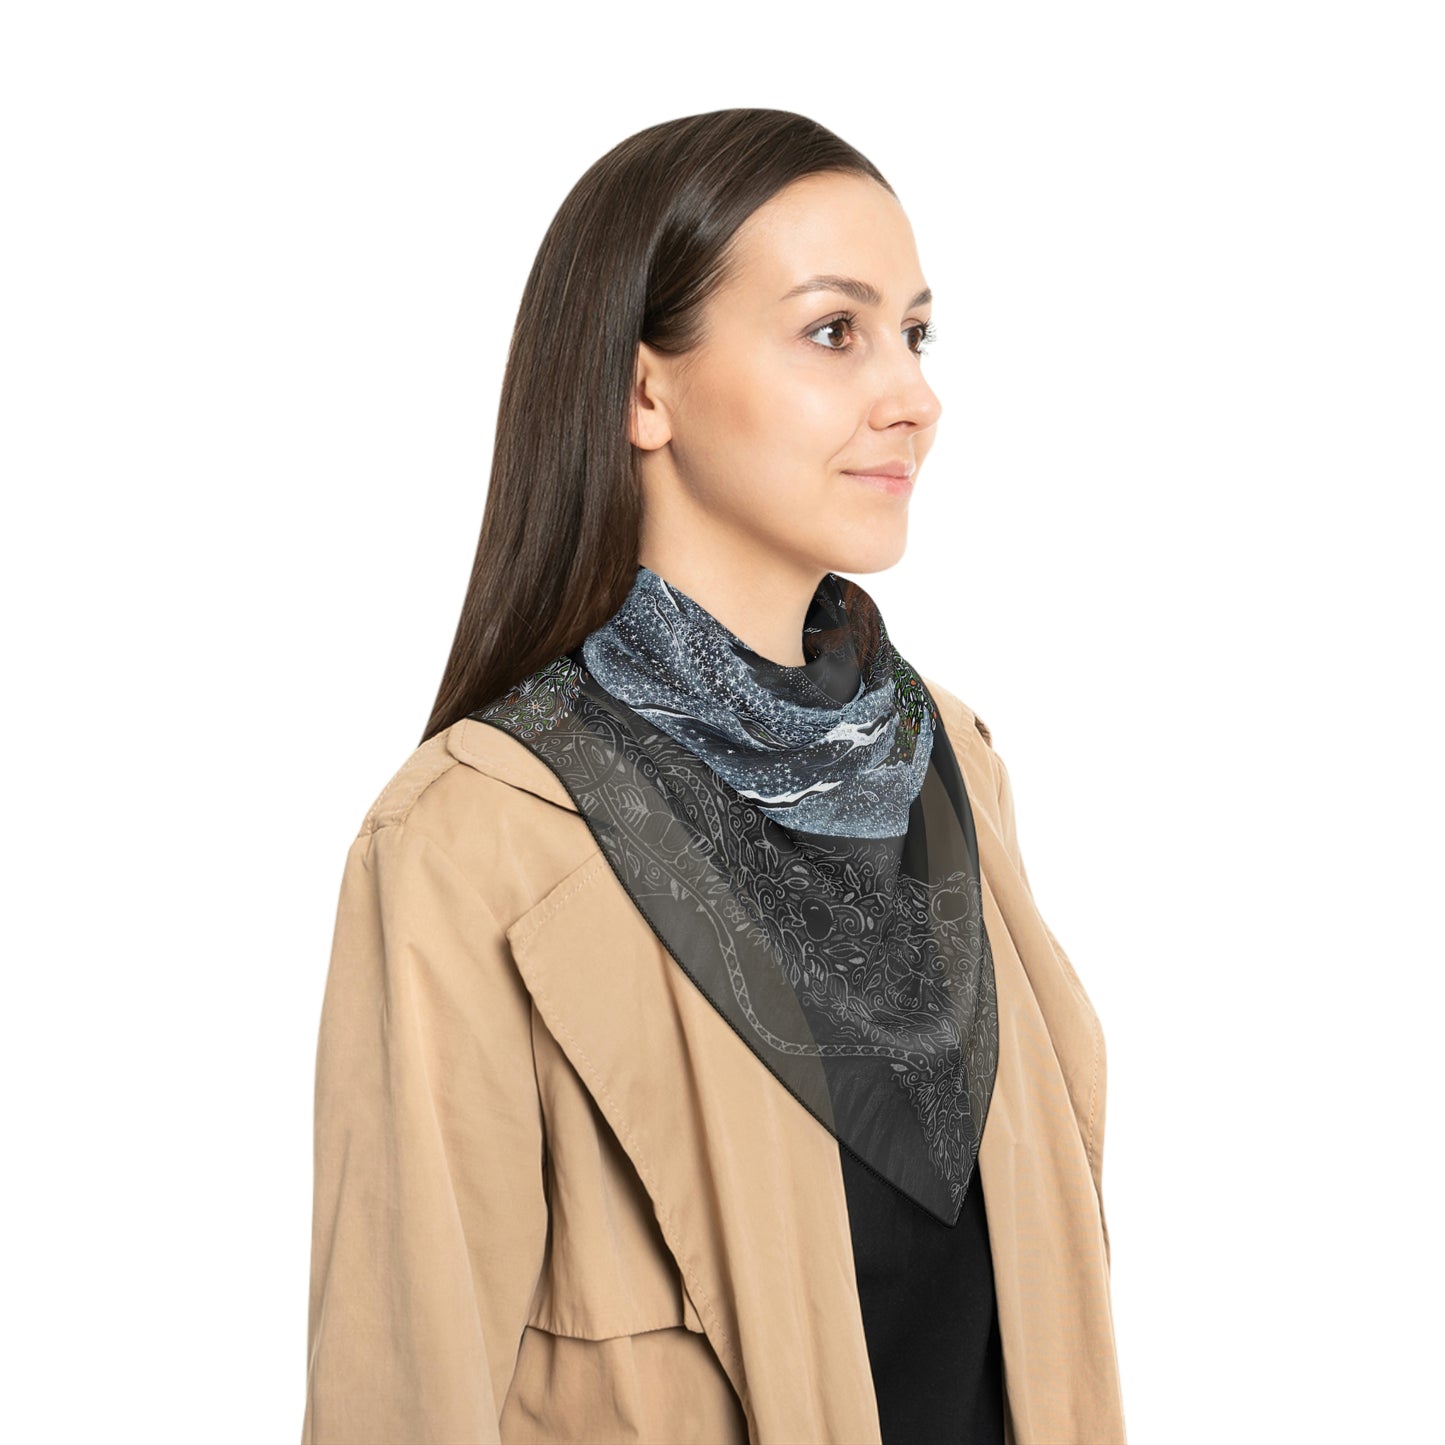 Chinese Years Zodiac Sign Poly Scarf (Horse)